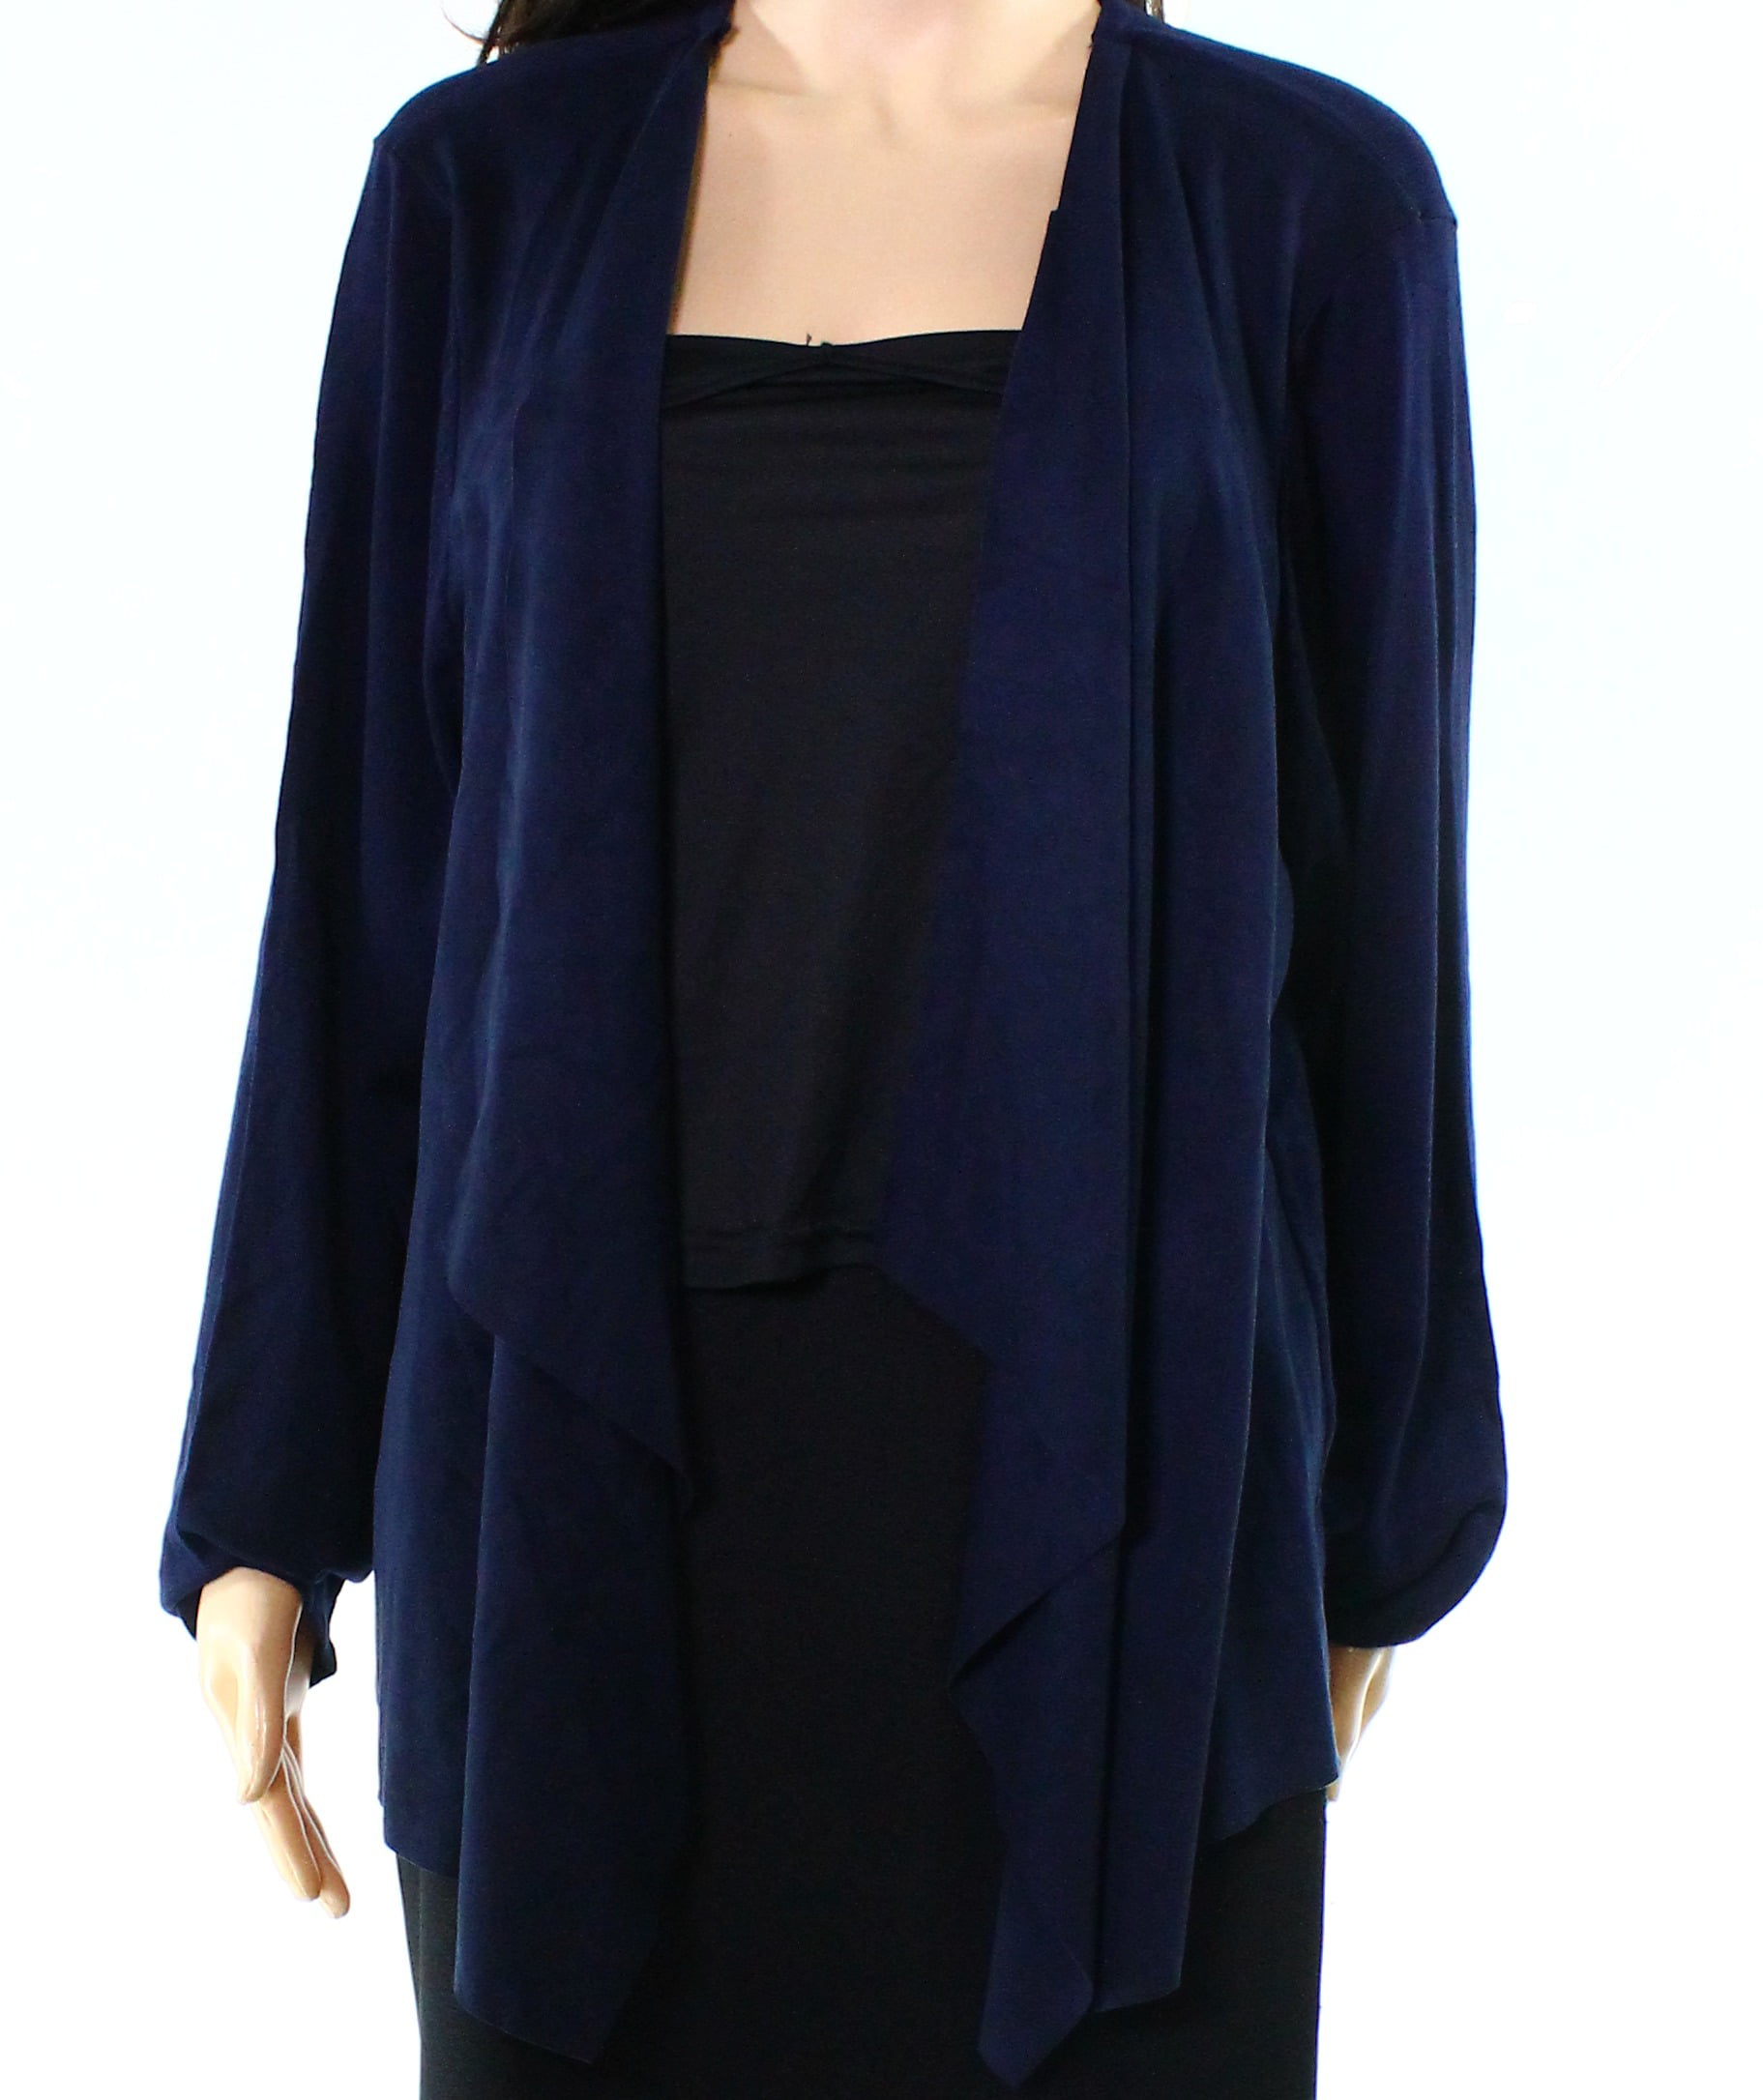 INC - INC NEW Navy Blue Womens Size 3X Plus Cardigan Faux-Suede Sweater ...